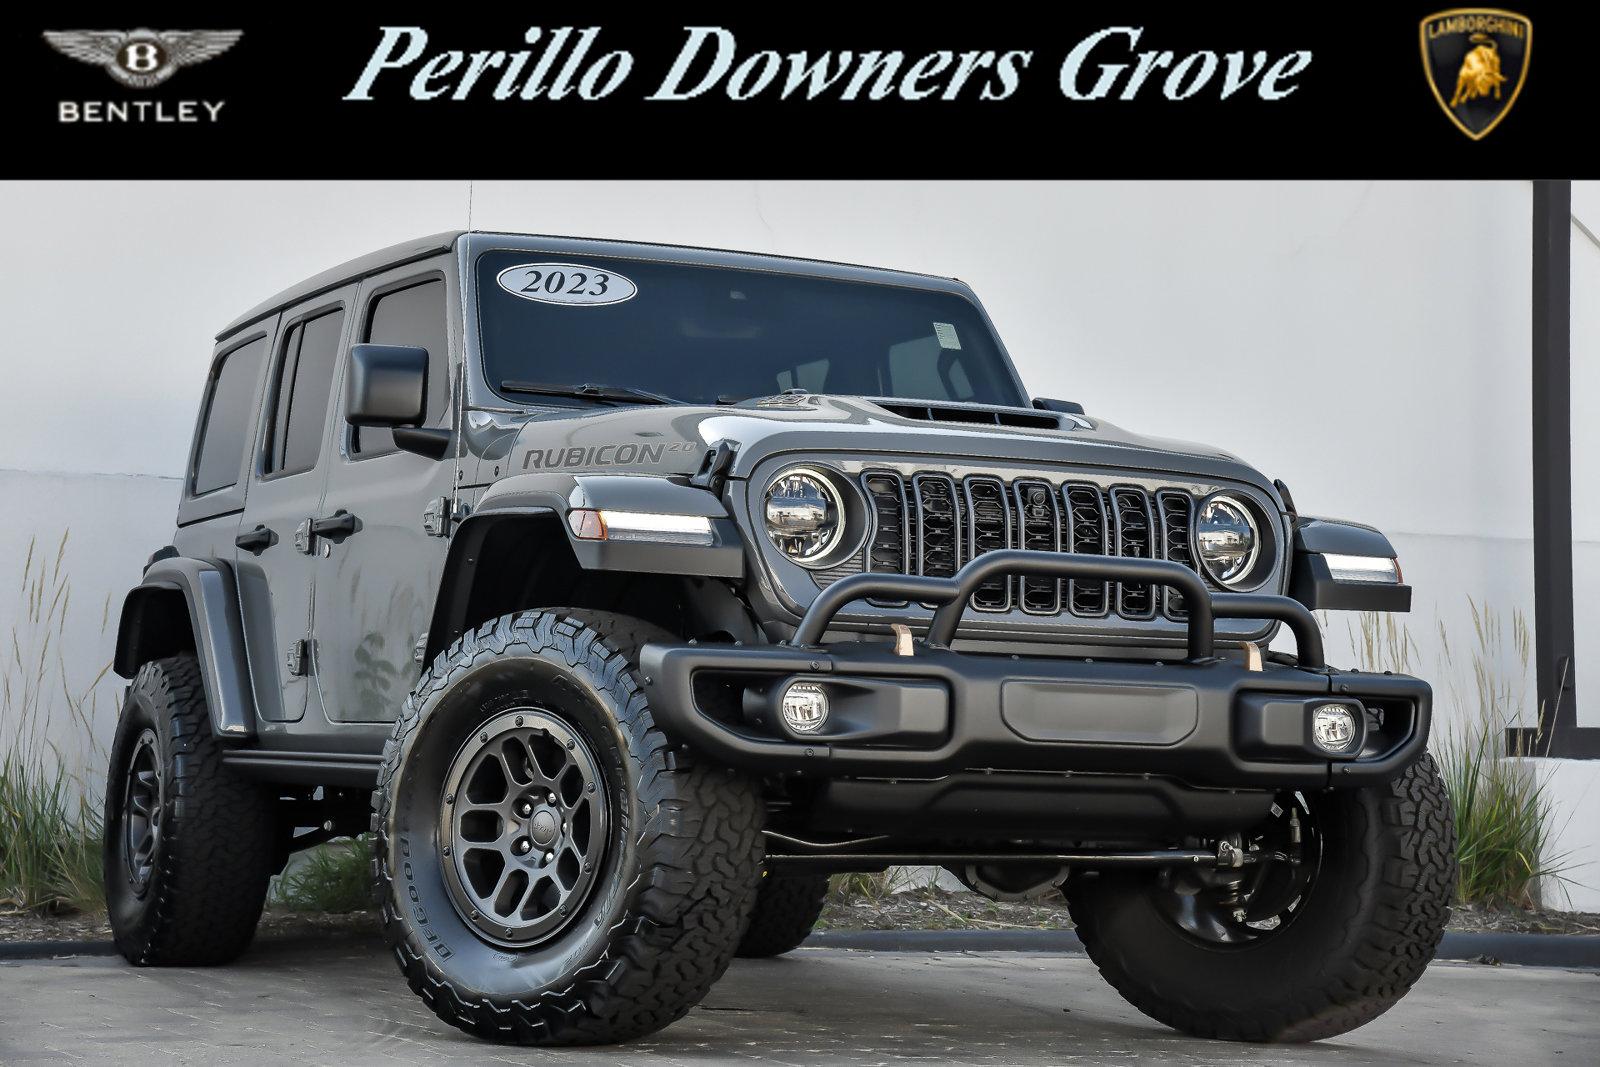 Used 2023 Jeep Wrangler Rubicon 392 20th Anniversary For Sale